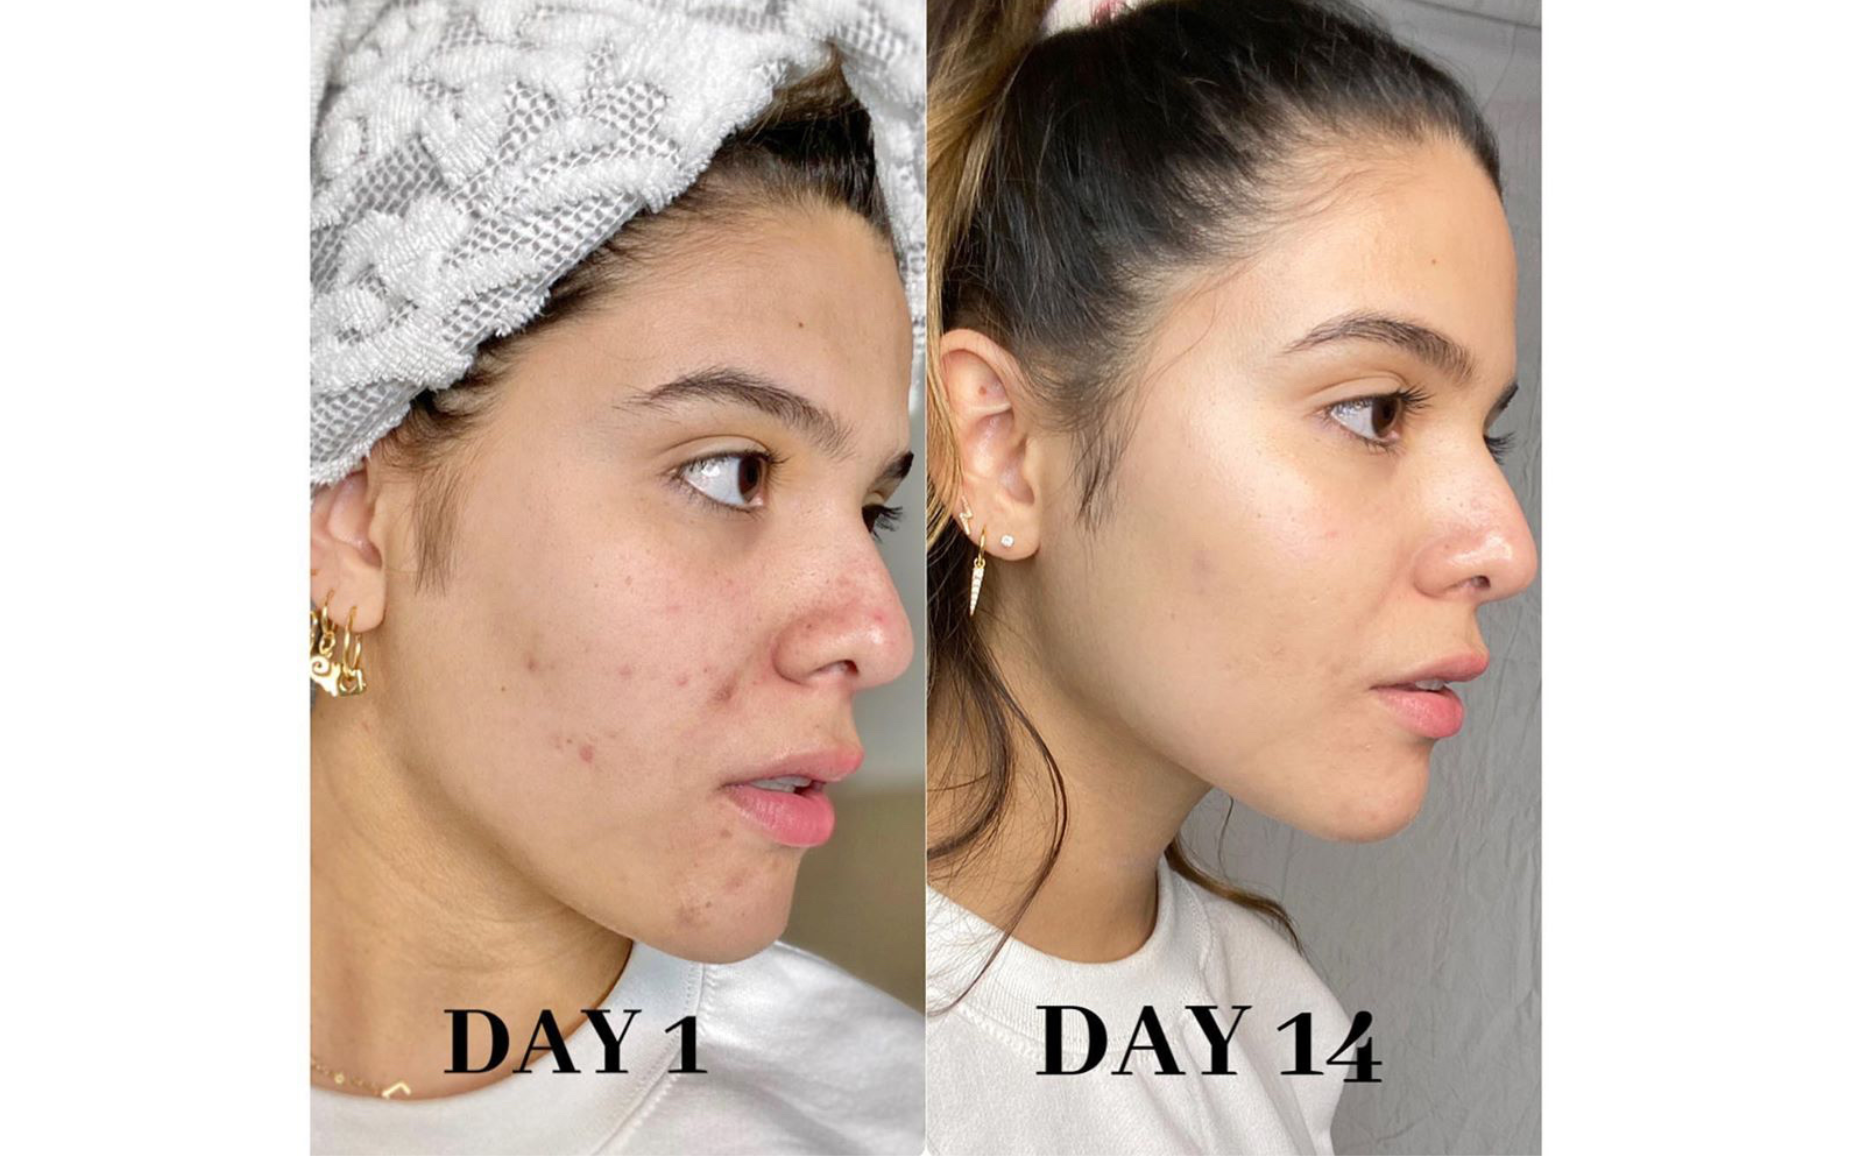 before and after results using skin success